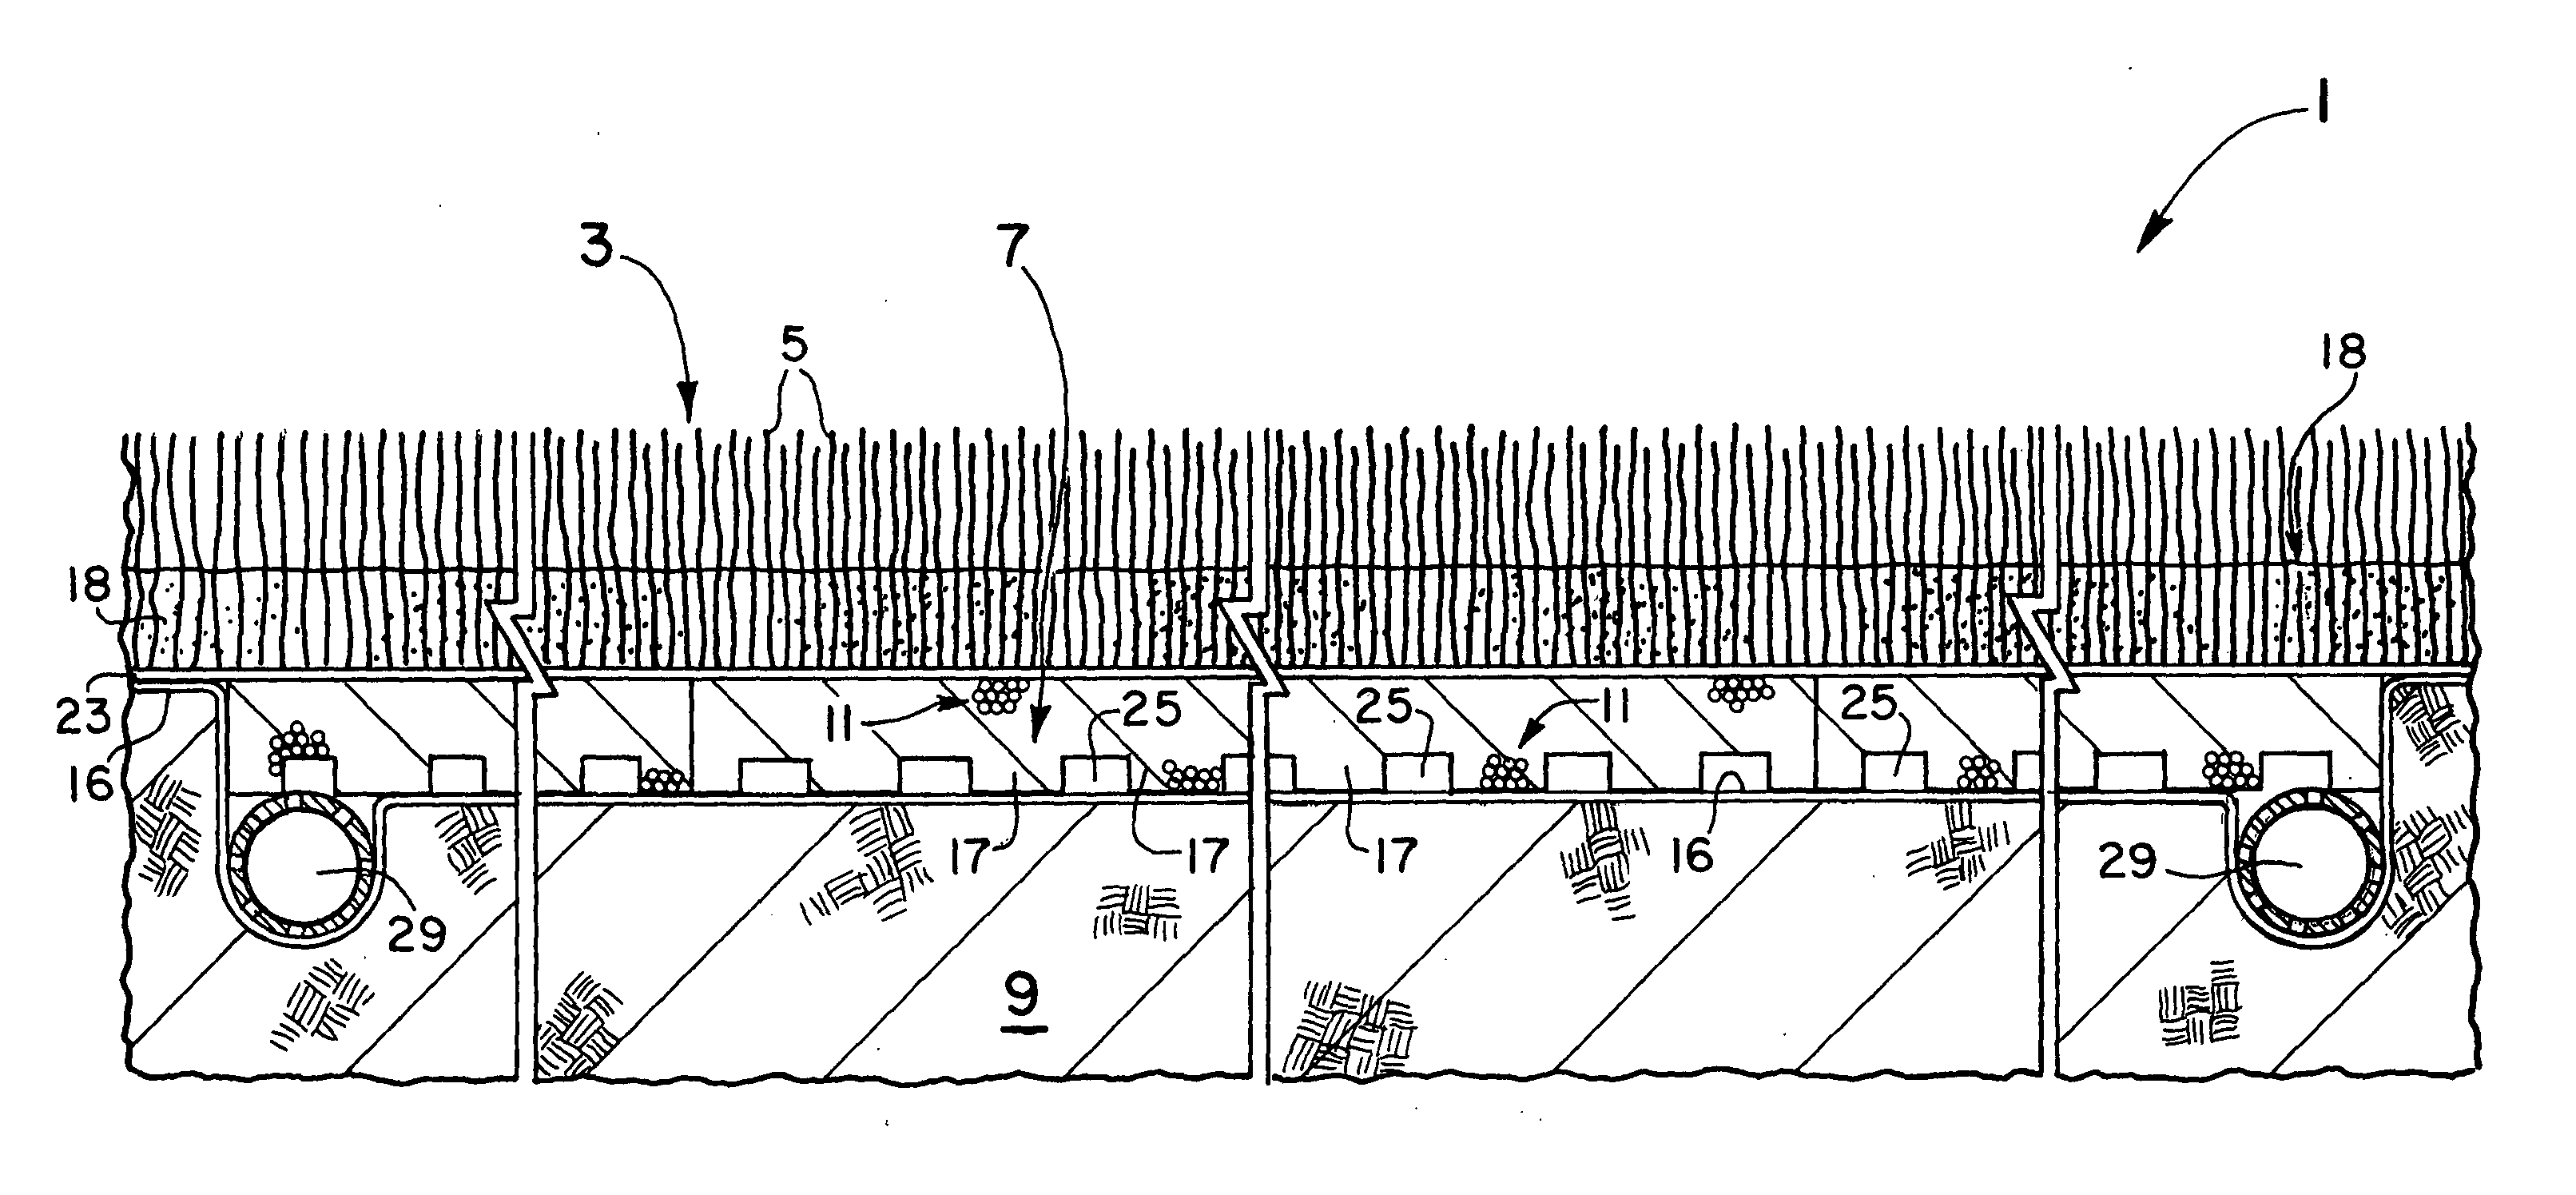 Multi-layered sports playing field with a water draining, padding layer